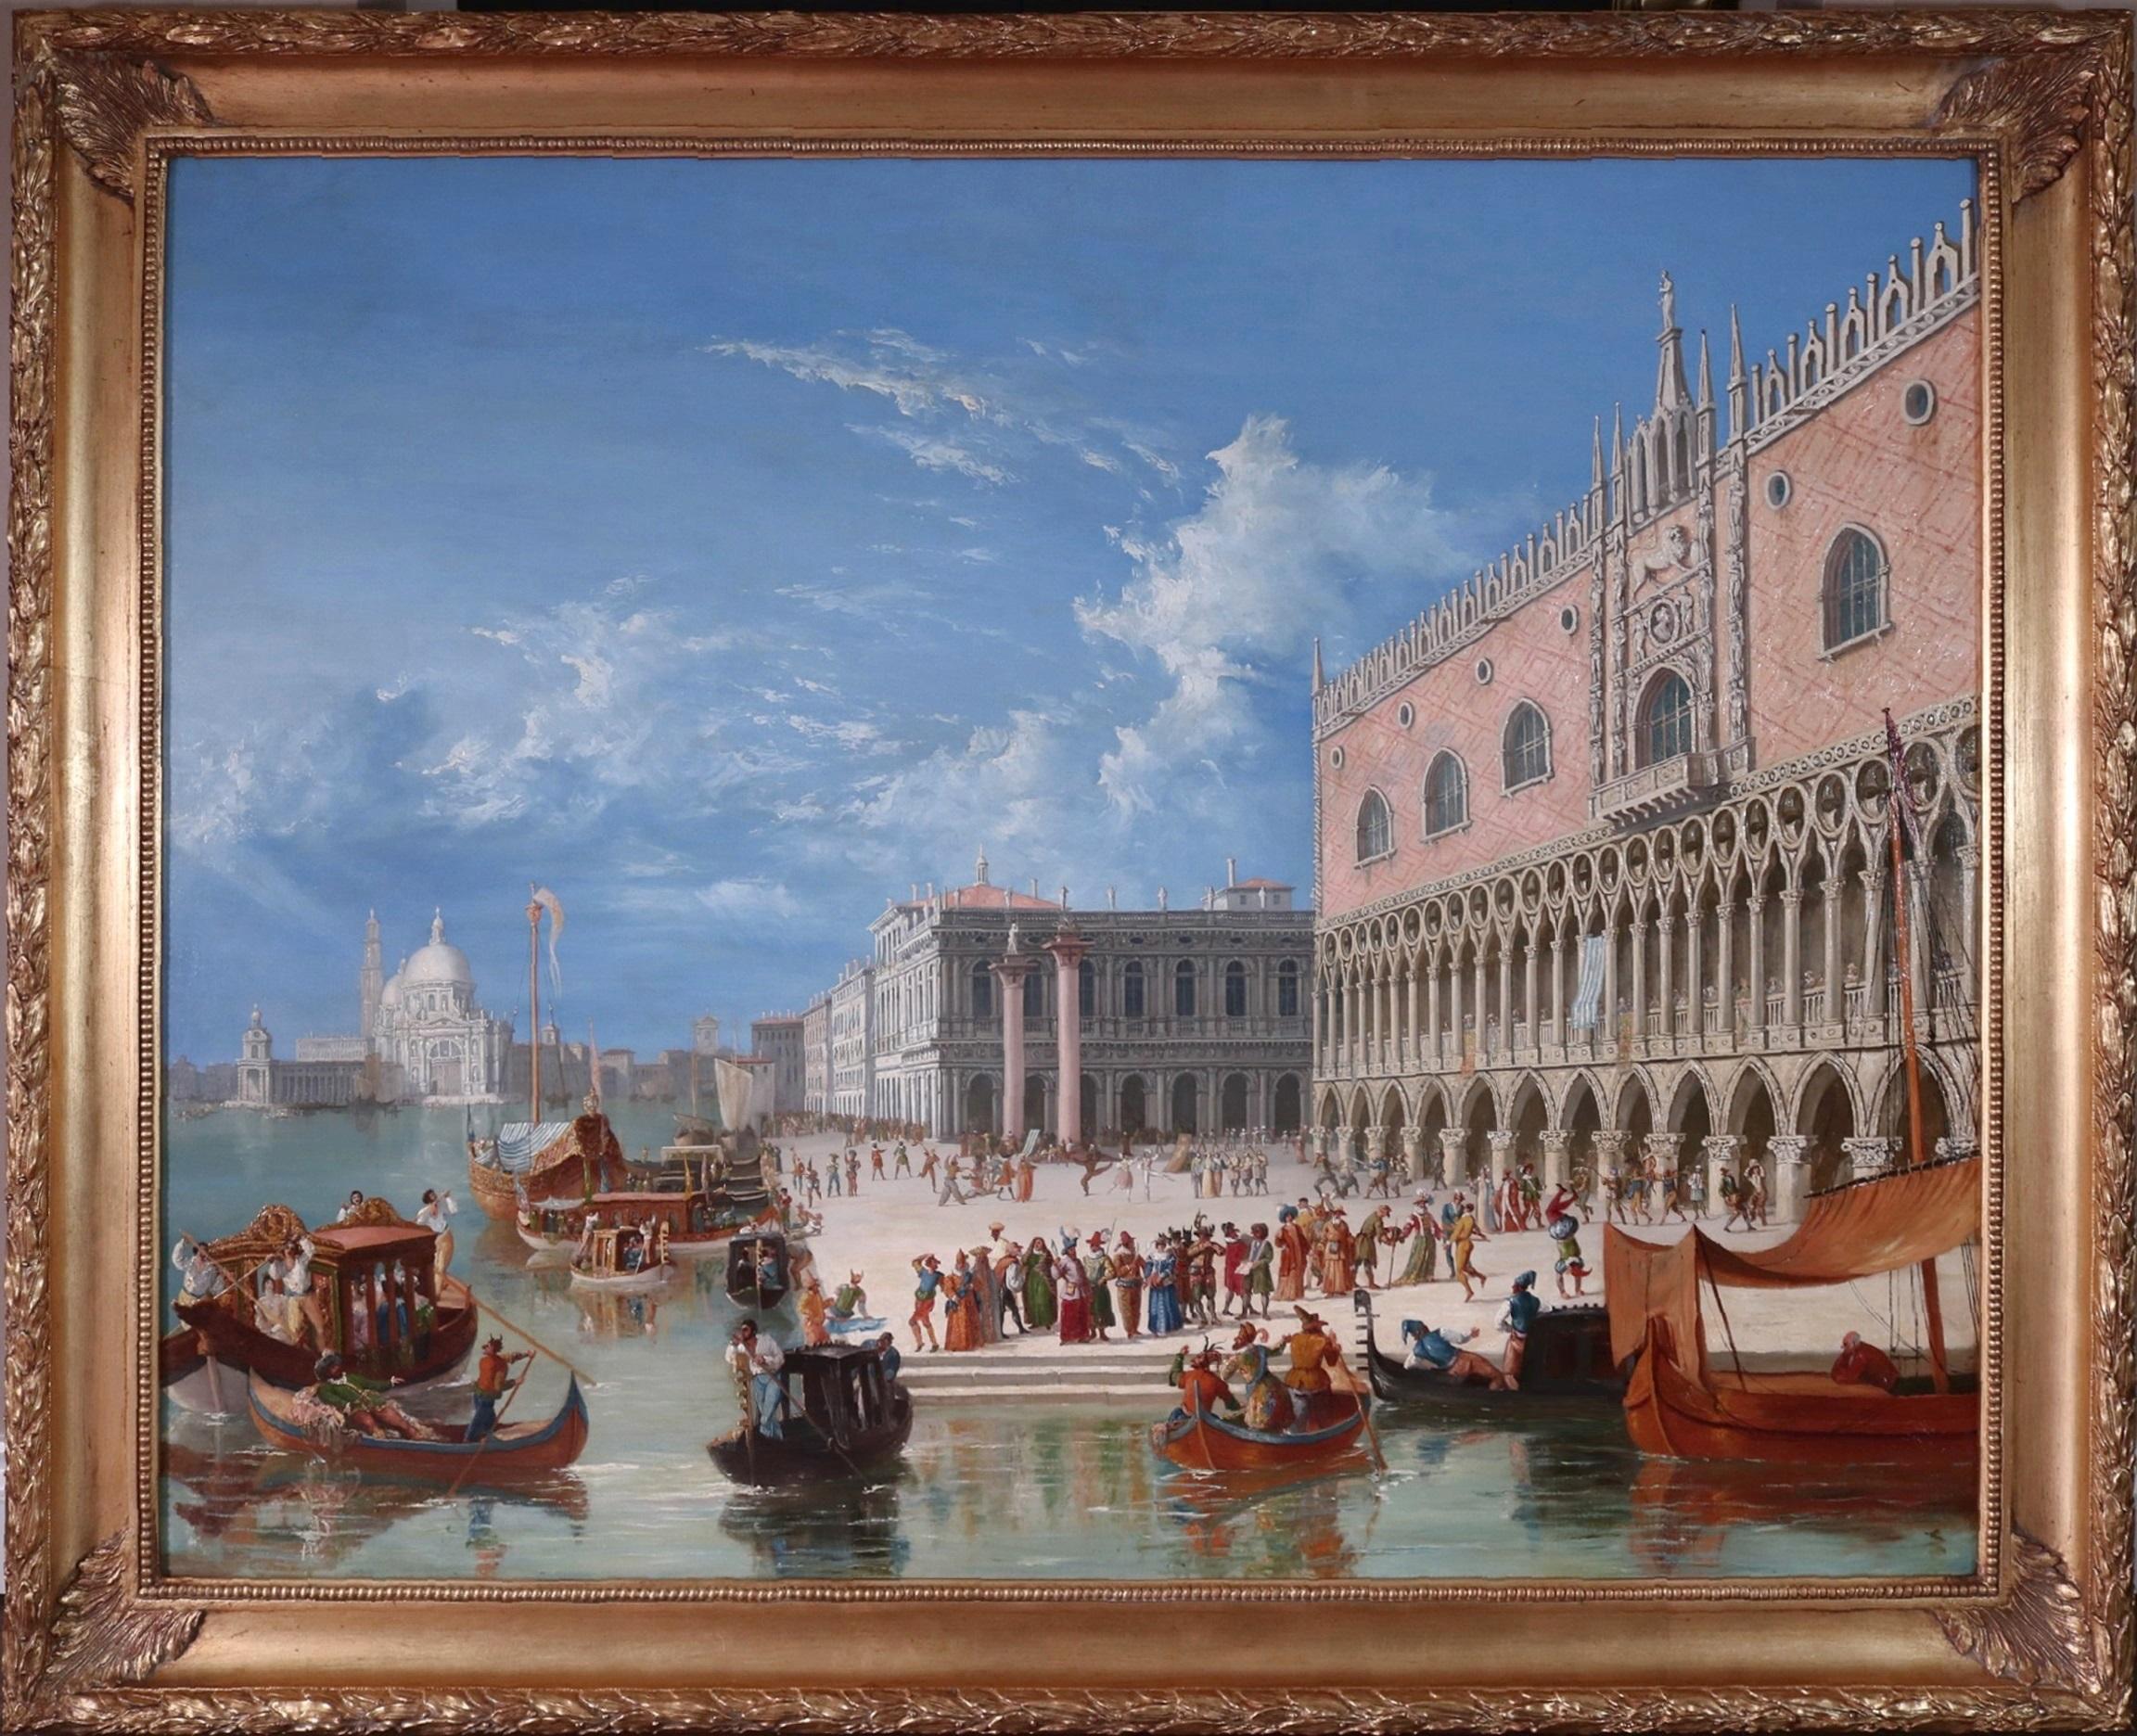 Carnevale di Venezia - Large 19th Century Oil Painting of Venice Carnival Italy - Gray Figurative Painting by James Holland